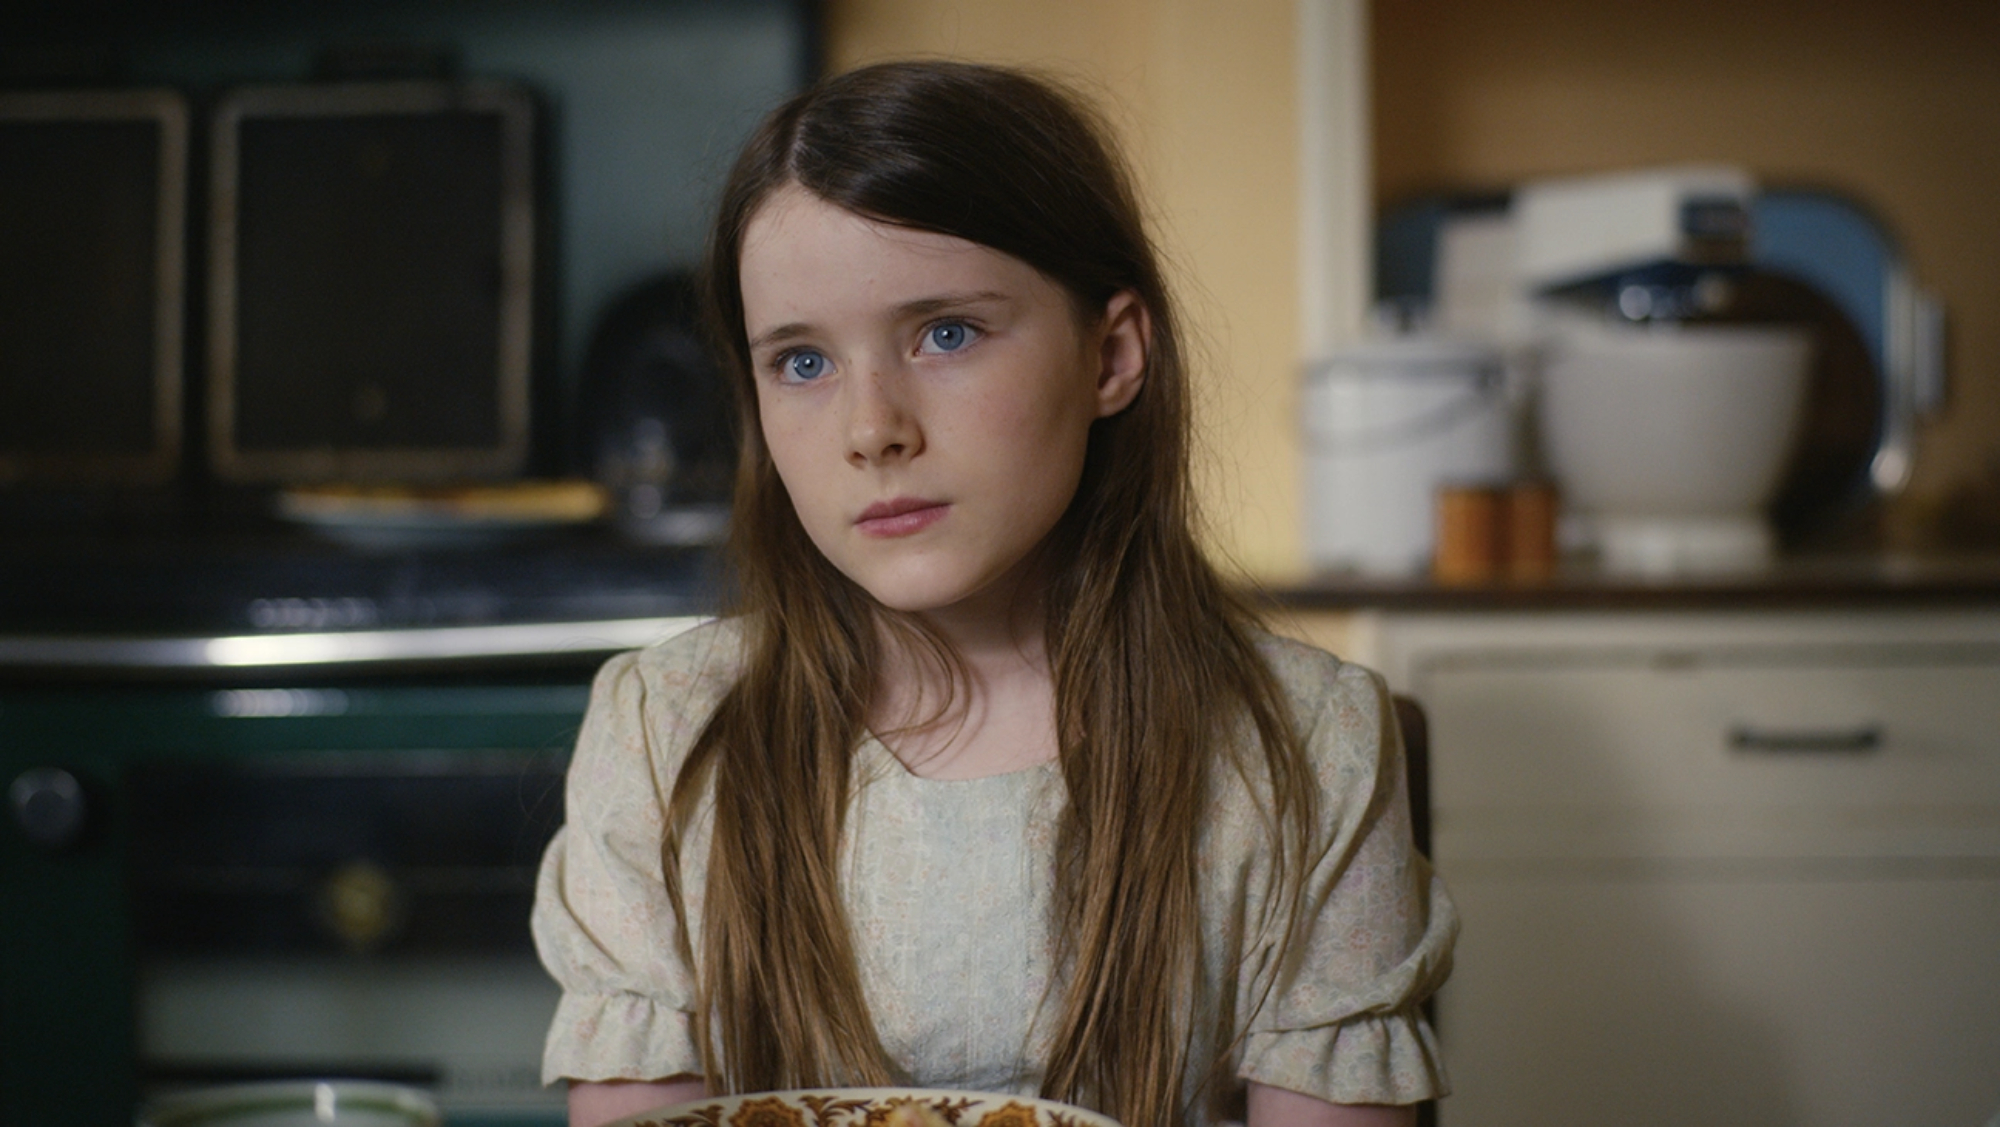 'The Quiet Girl' Catherine Clinch as Cáit sitting in a chair at the kitchen table looking unsure